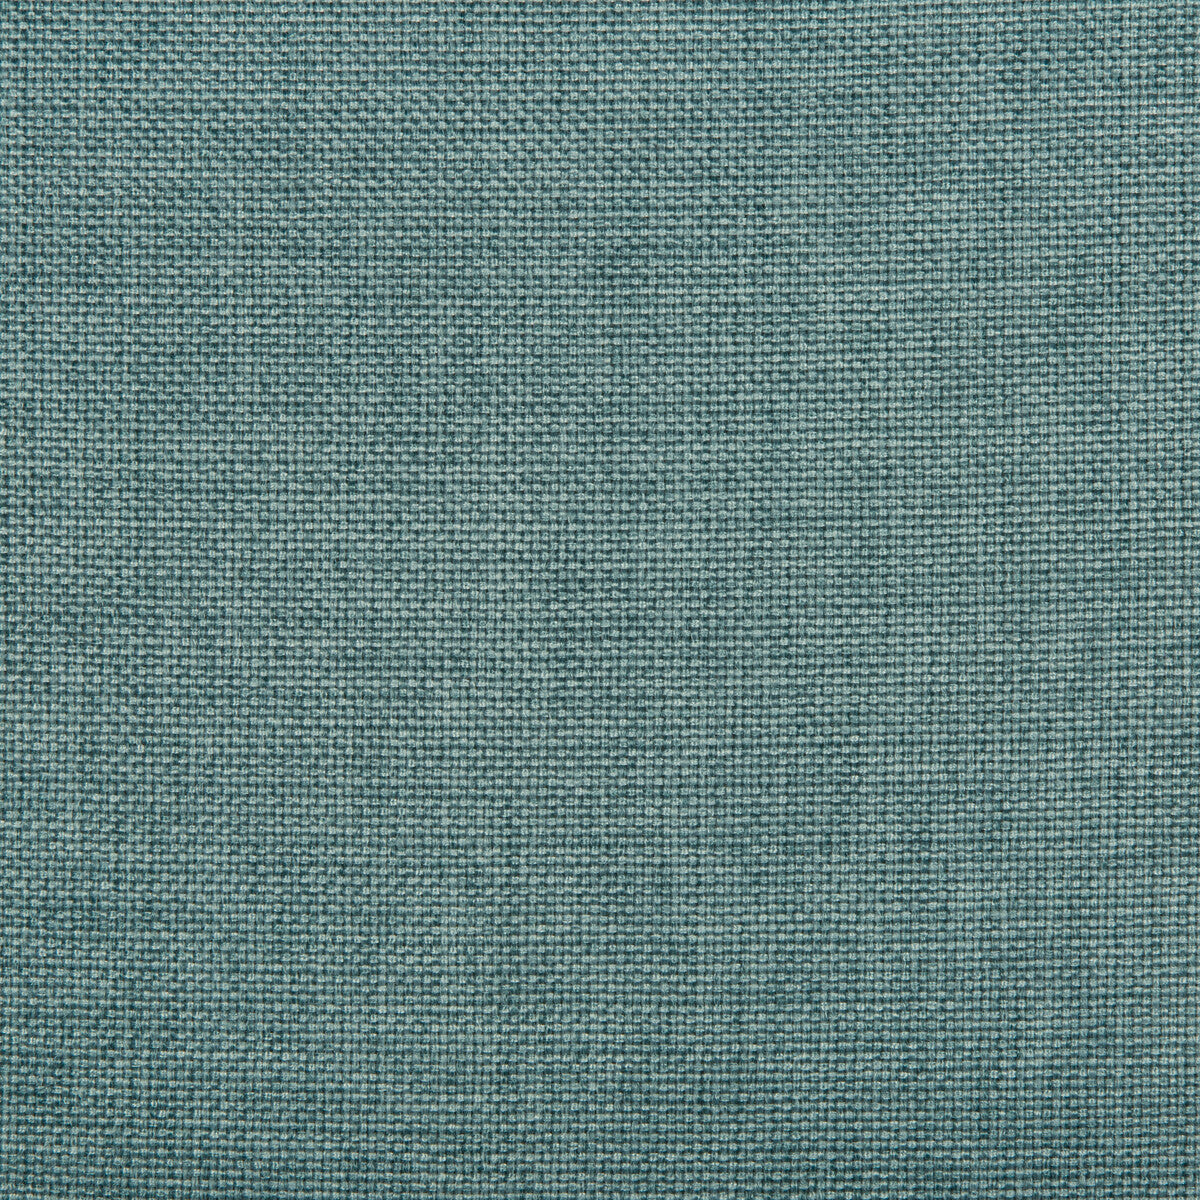 Kravet Contract fabric in 4637-53 color - pattern 4637.53.0 - by Kravet Contract